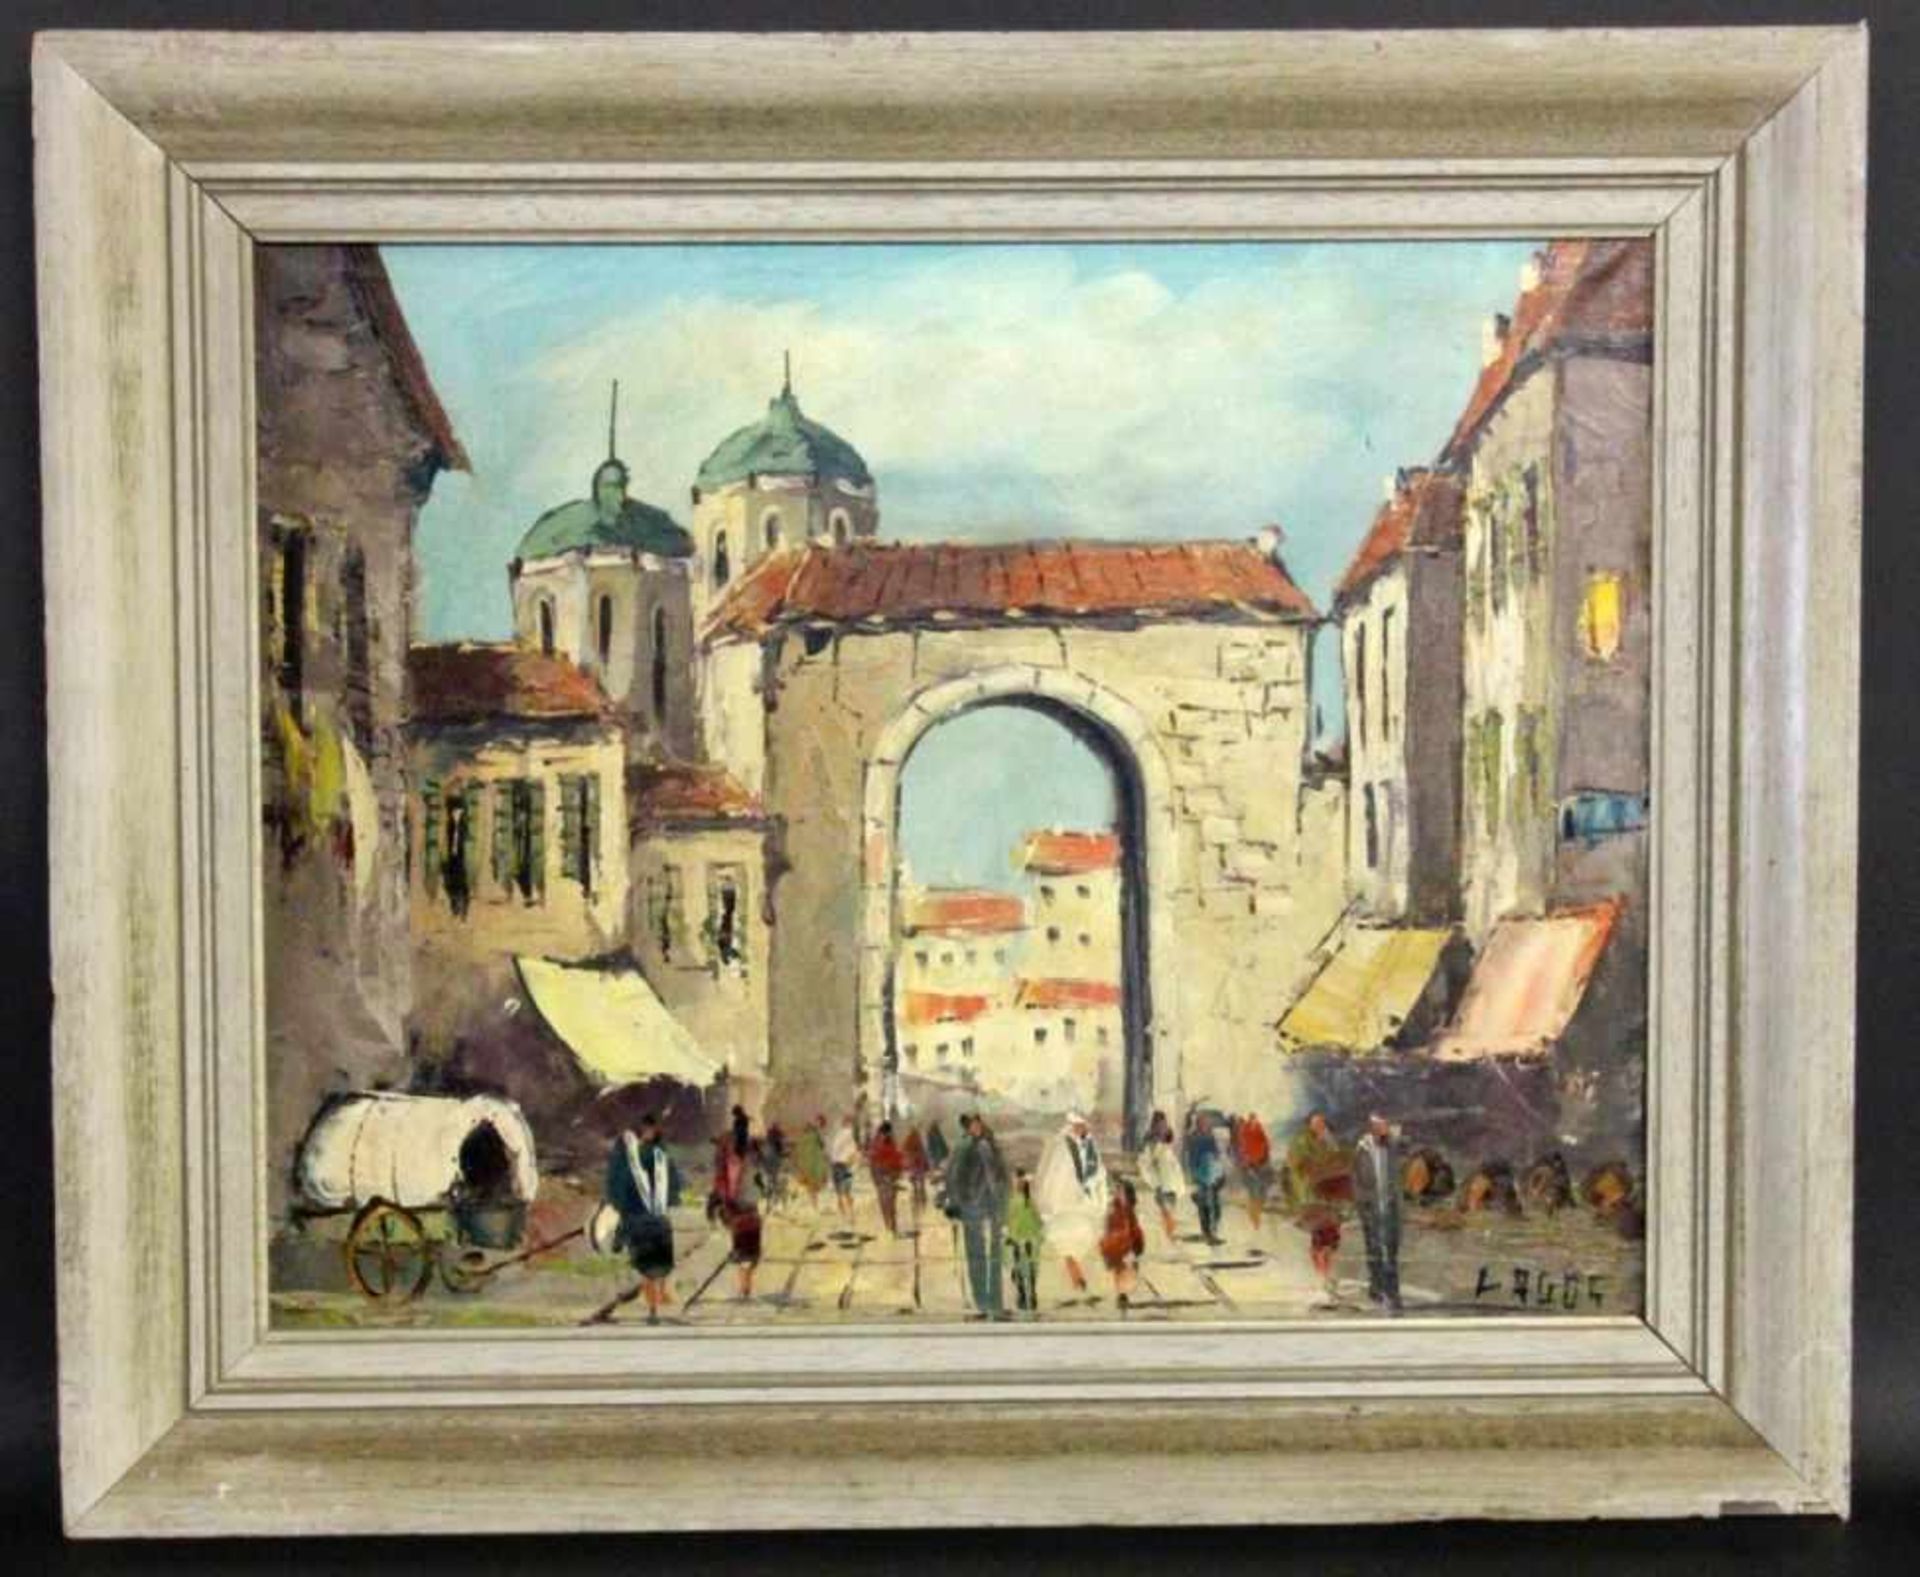 AGDE, L. French painter, 20th century Archway in front of baroque city with many people.Oil on